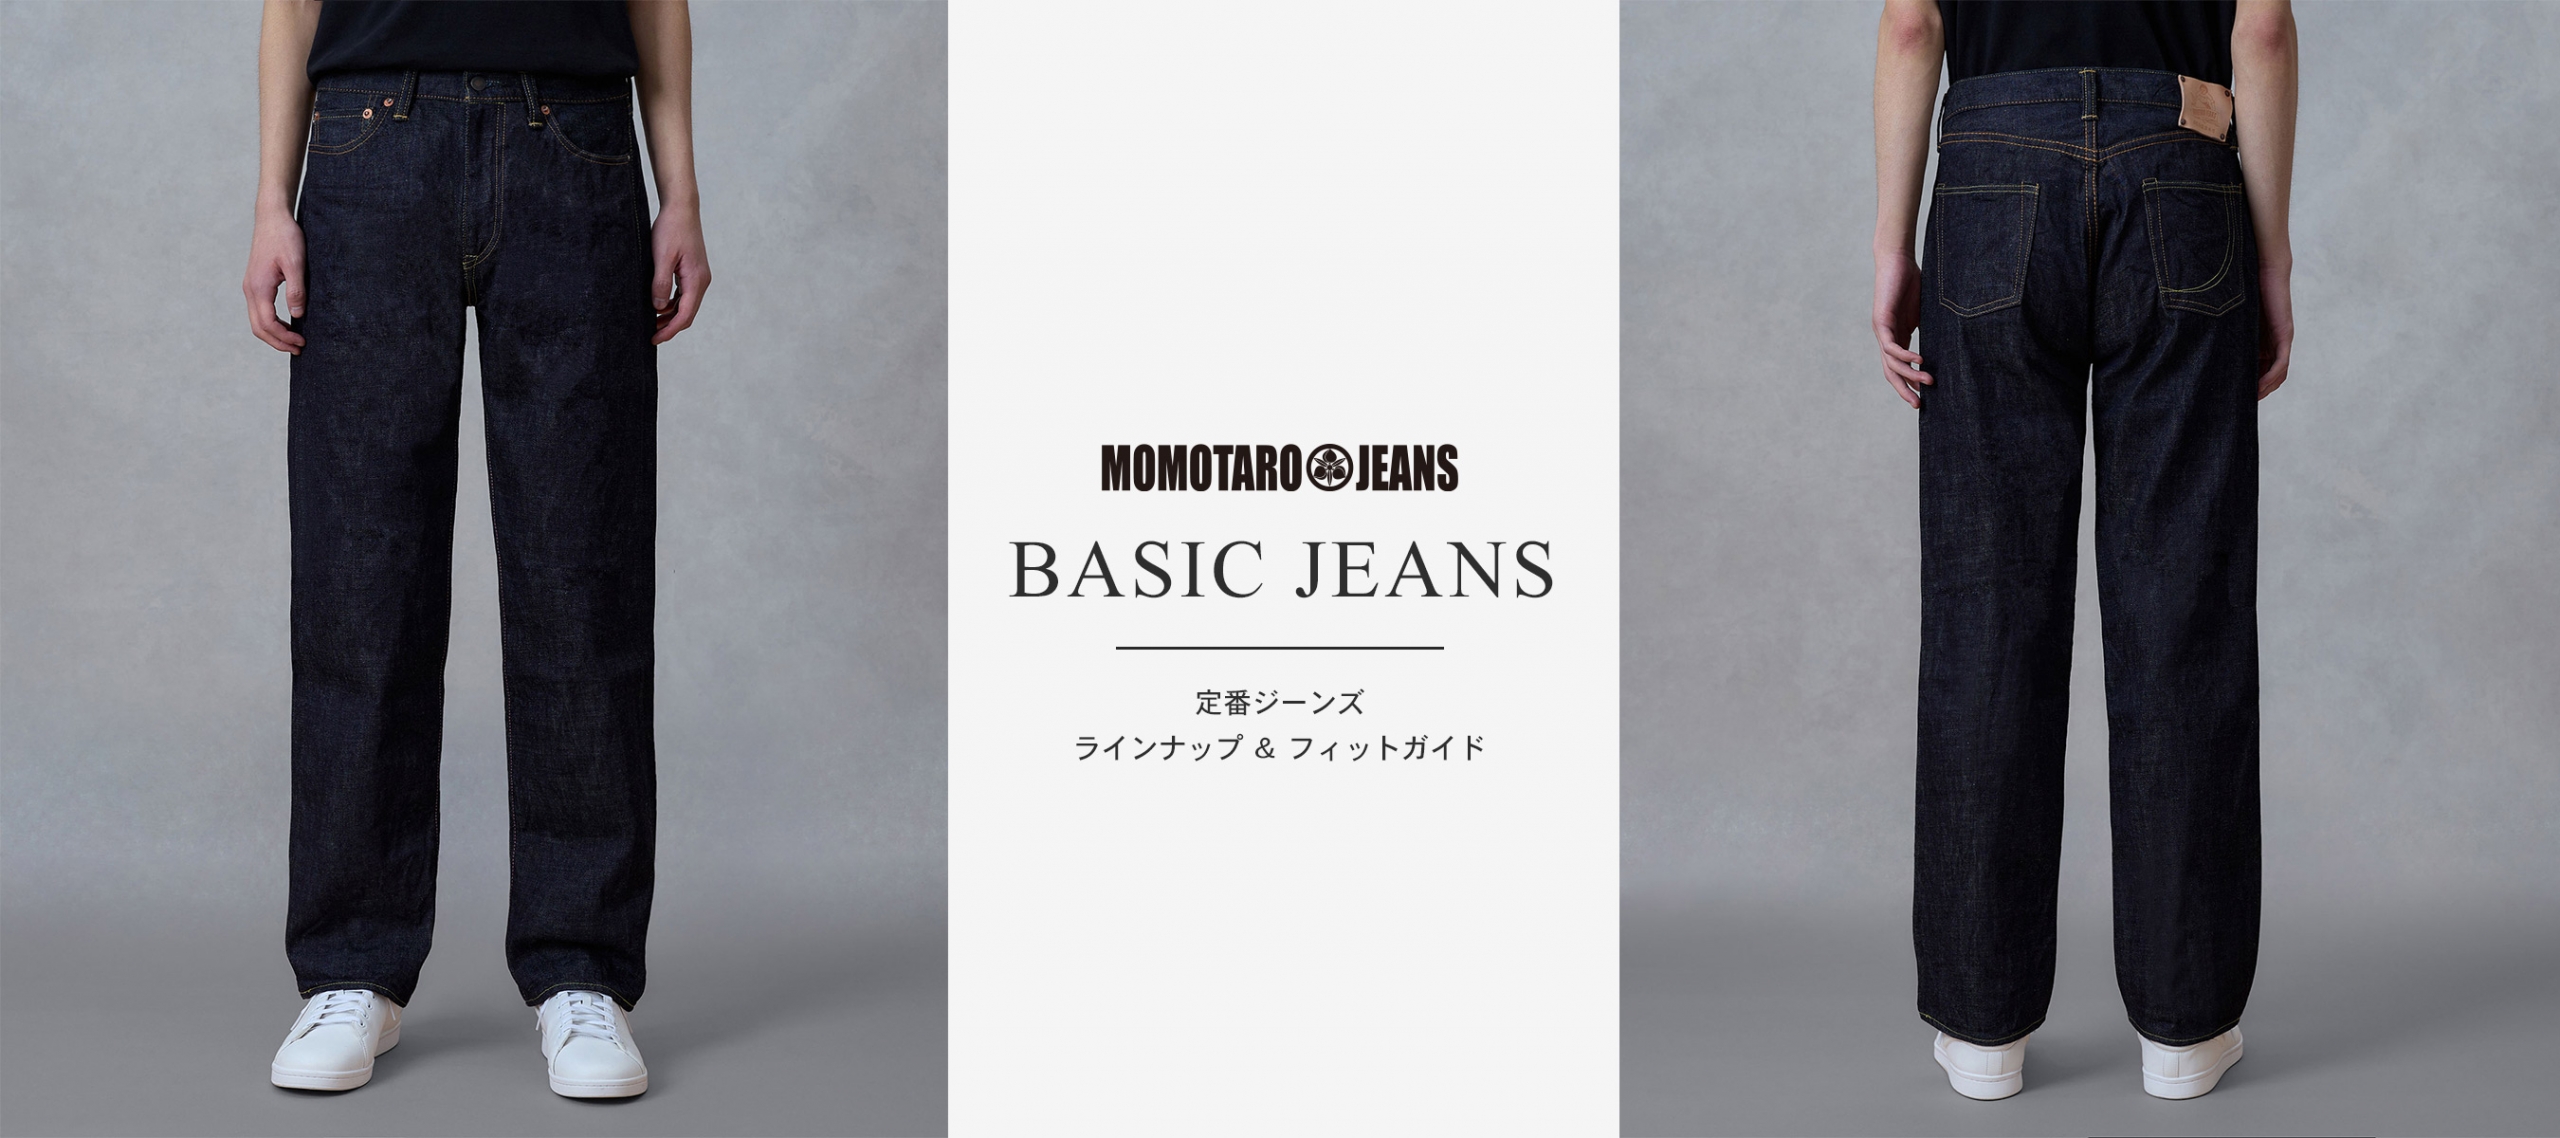 PC-mj-basic-jeans-lineup-and-fitguide